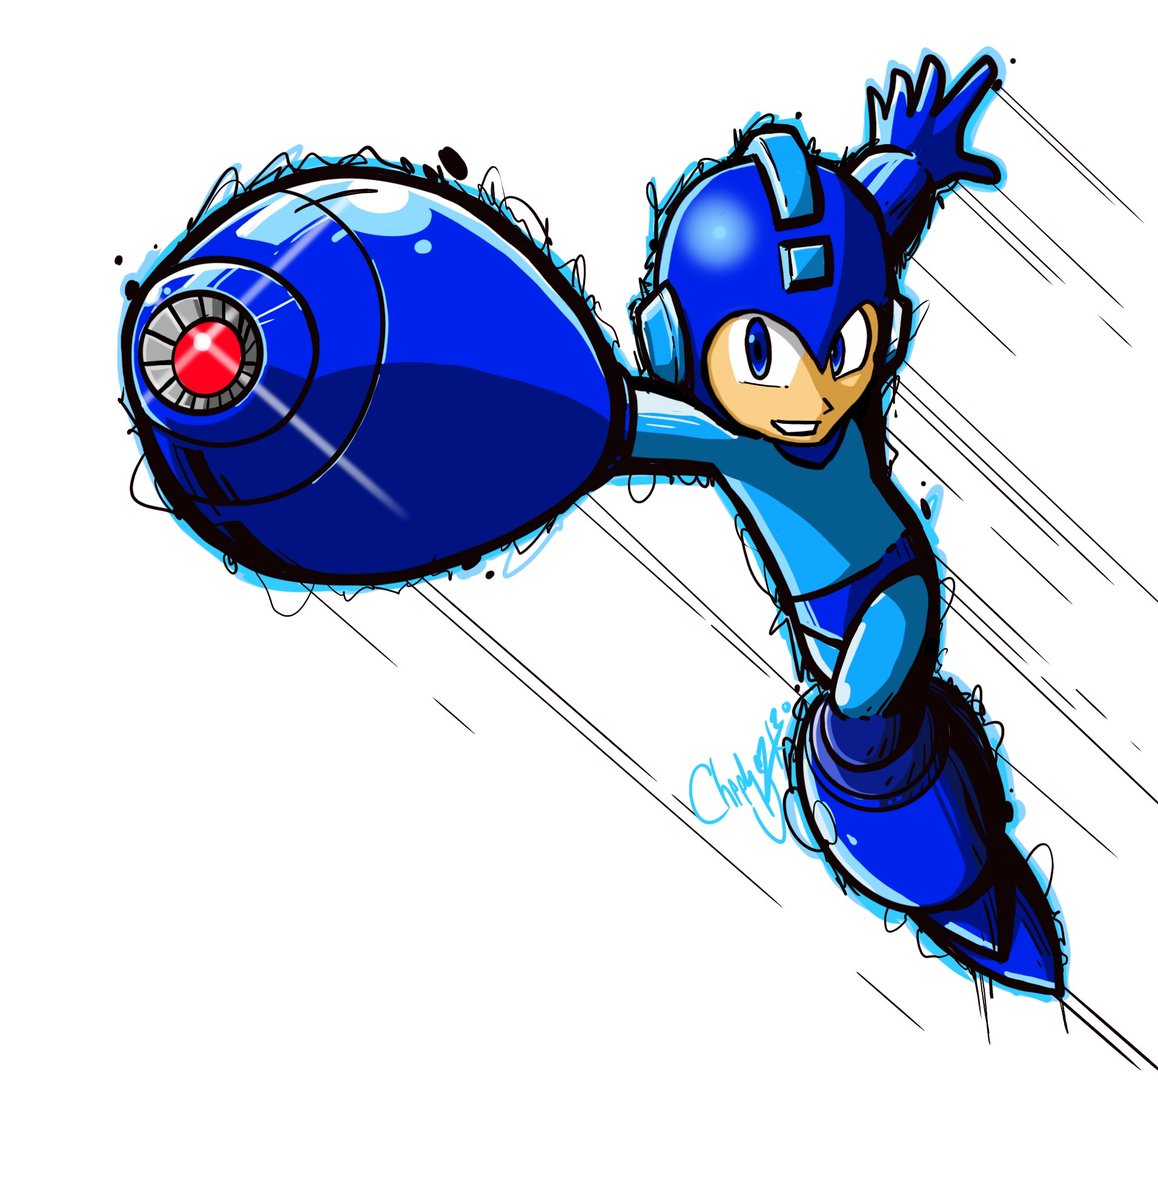 Mega man in full ink and color #Megaman #art #artists #artwork #drawing #color #coloring #blue #Pencils #Pencildrawing #DigitalArtist #digitalartworks #artoftheday #artoninstagram #cool #coolartwork #awesomeart #awesome #drawings #bluebomber #RETROGAMING #gaming #nintendo